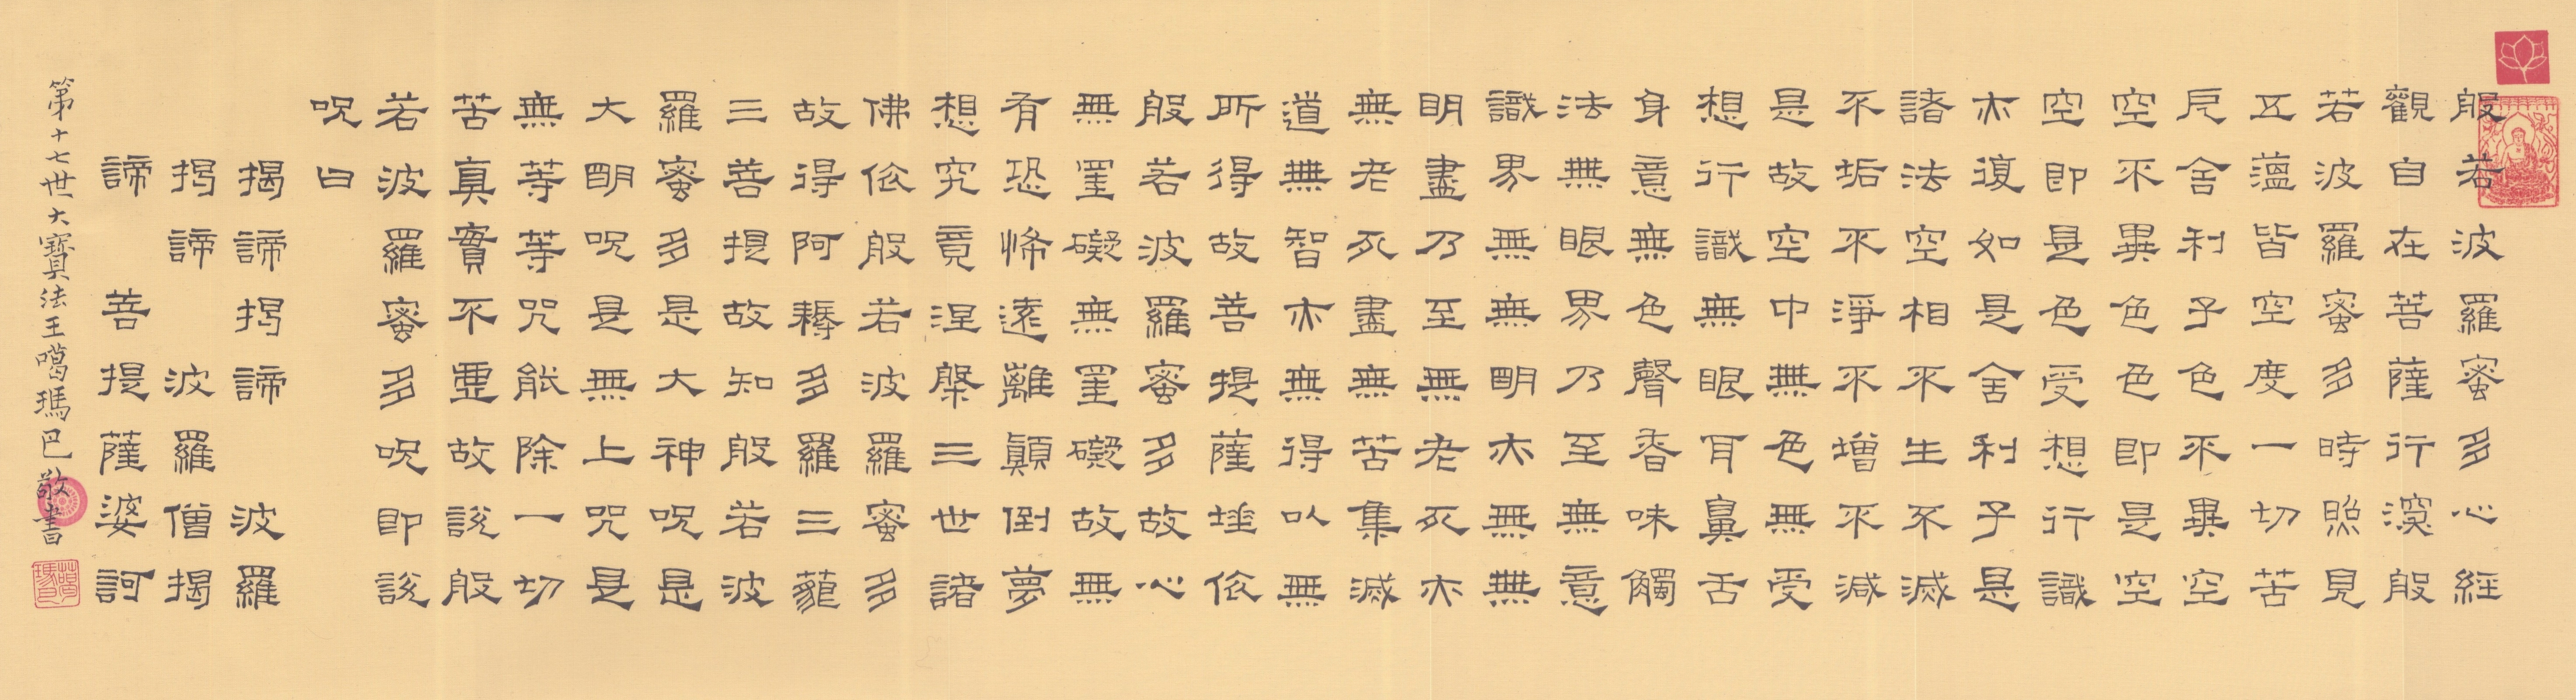 Heart Sutra Calligraphy by the Karmapa